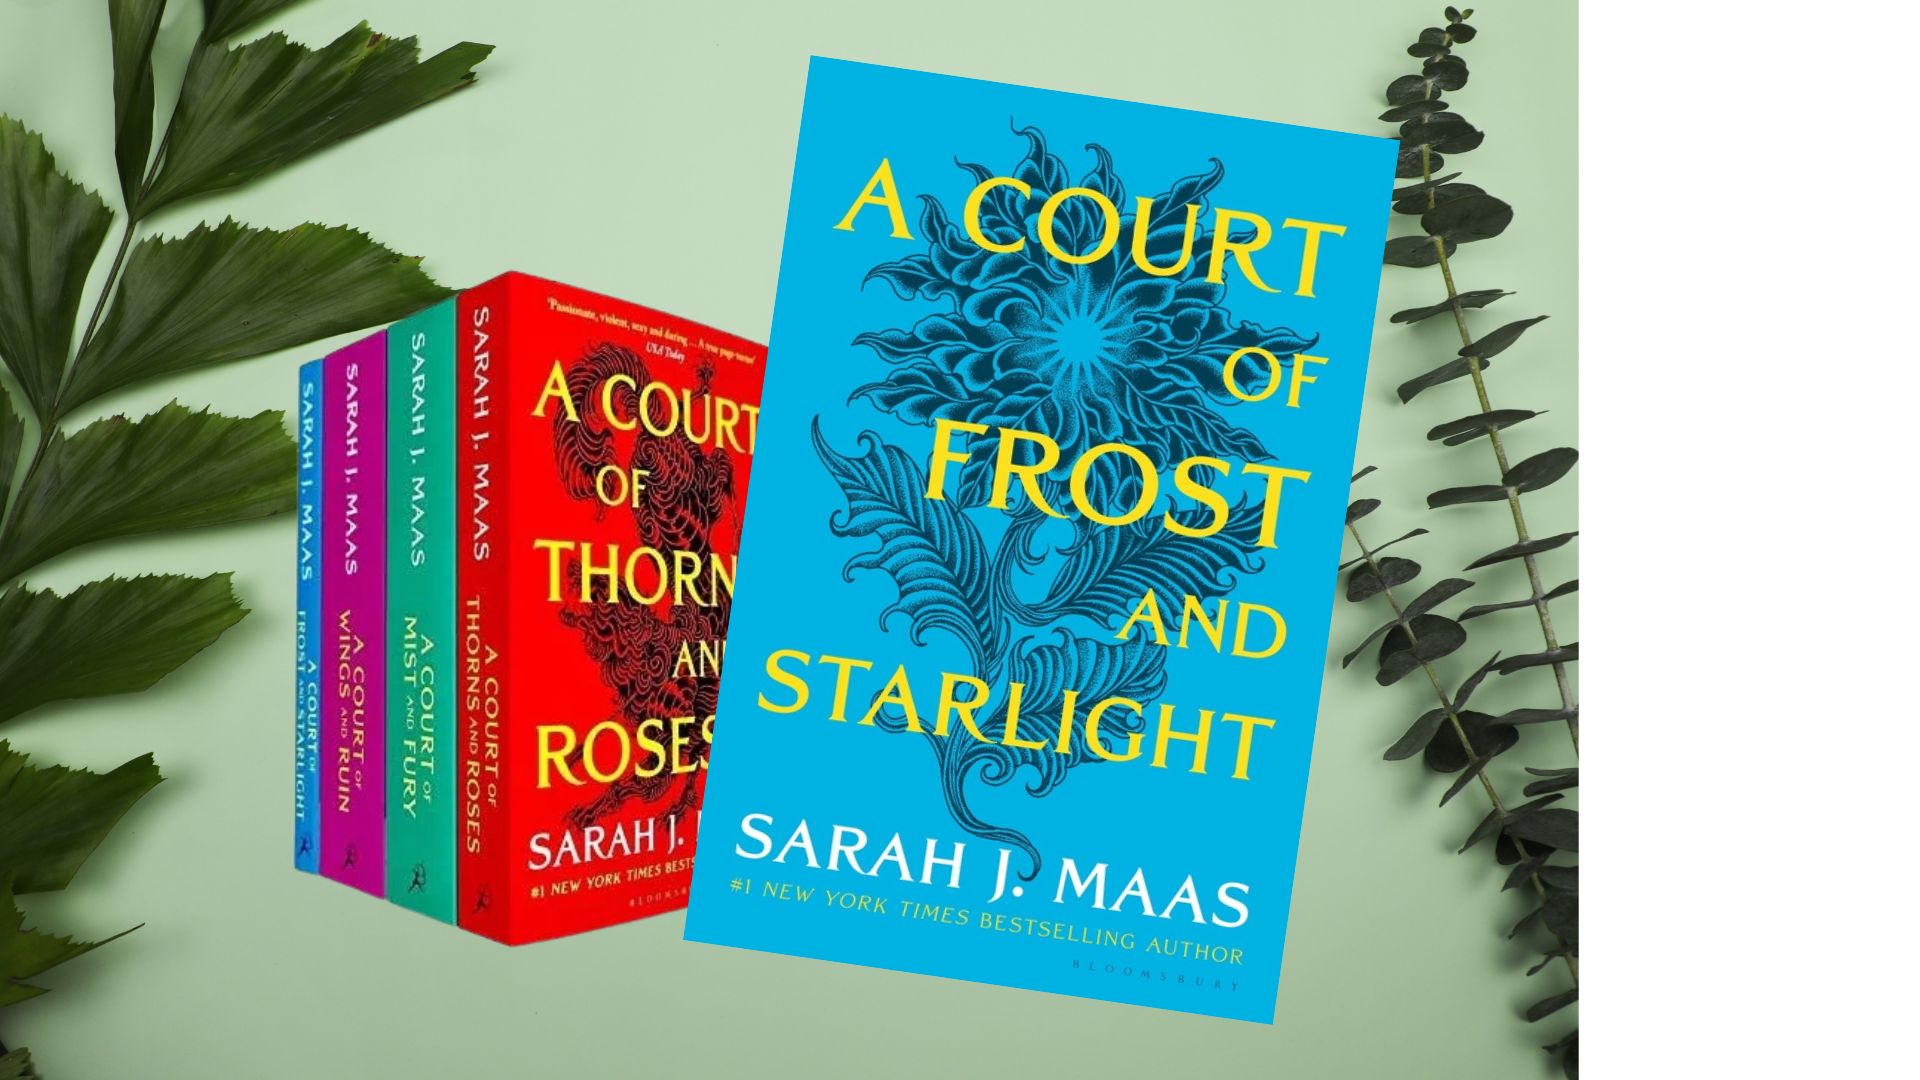  "A Court of Thorns and Roses" series